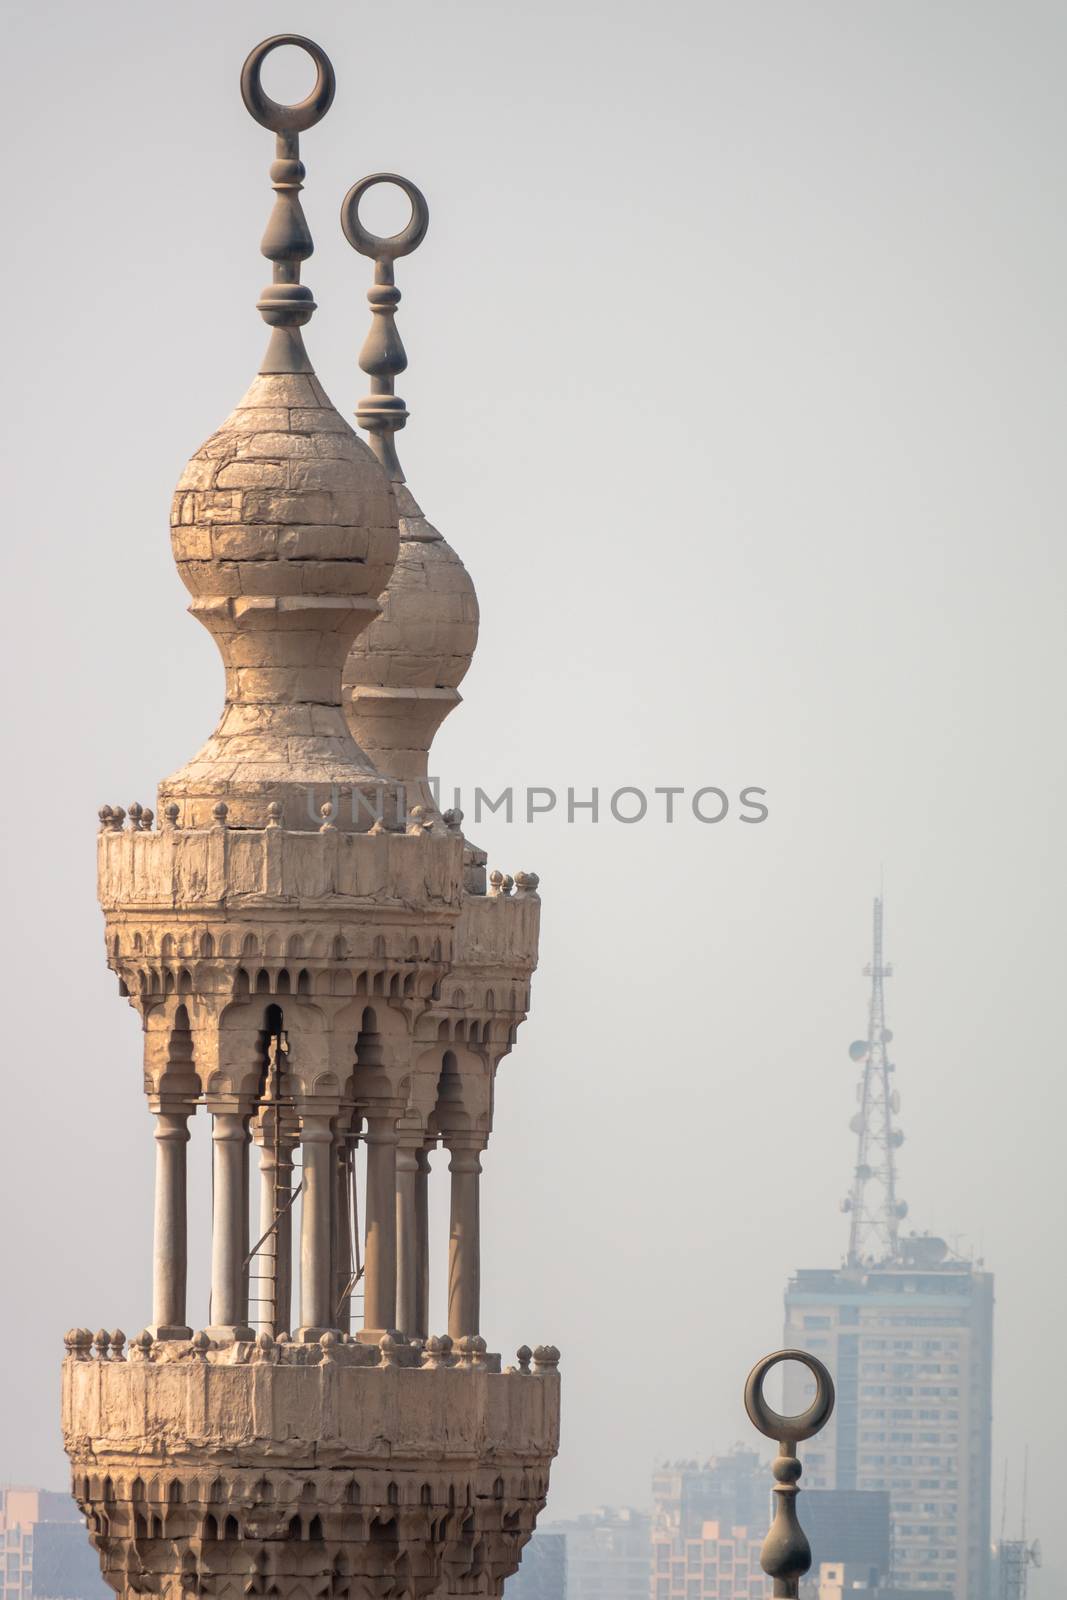 An image of a mosque minaret in Cairo Egypt